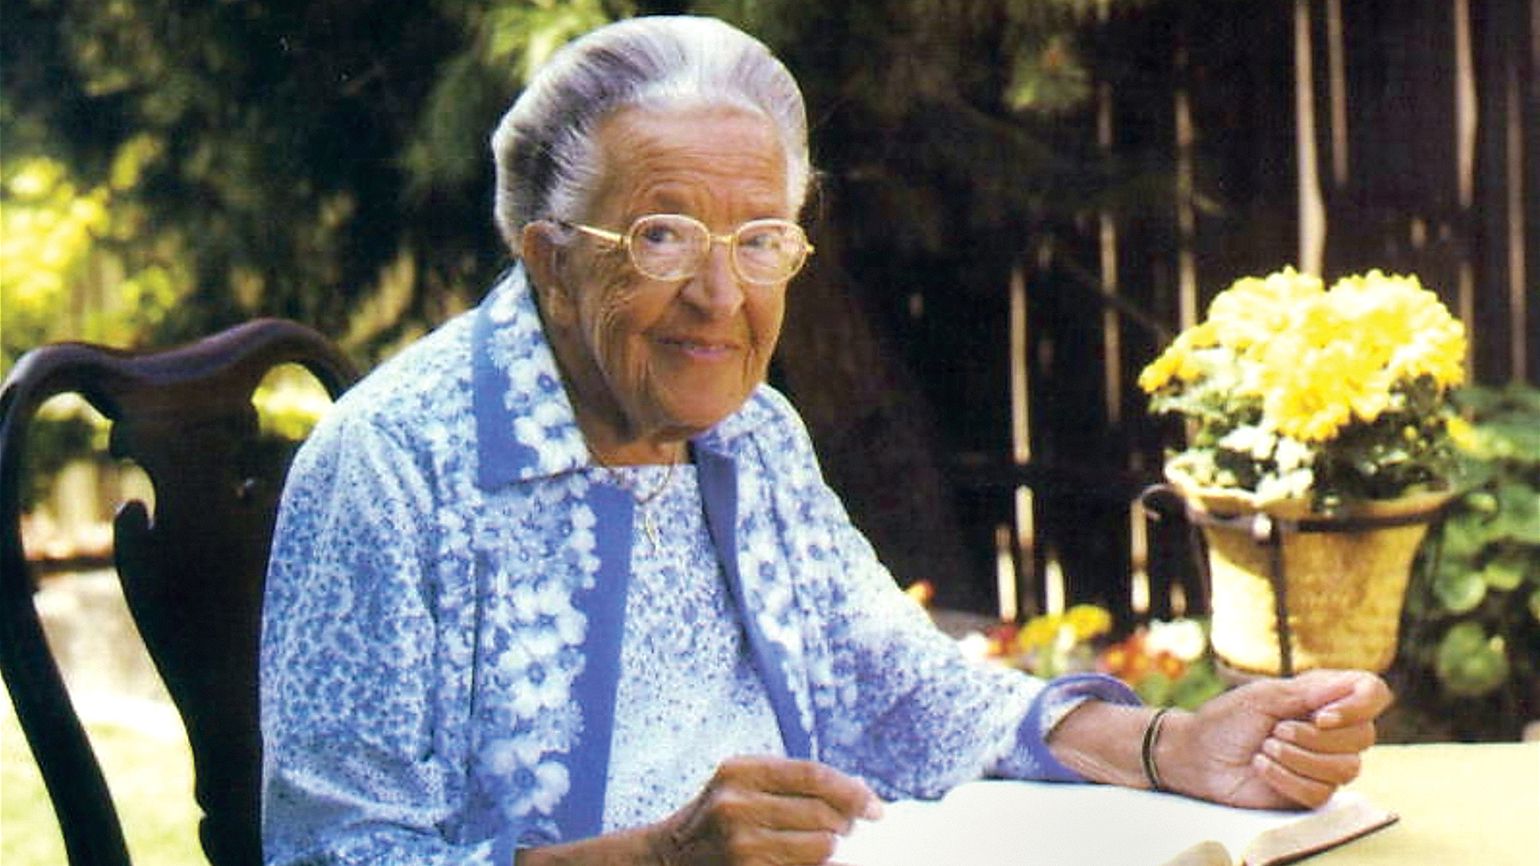 A portrait of Corrie ten Boom sitting outside on a warm day.